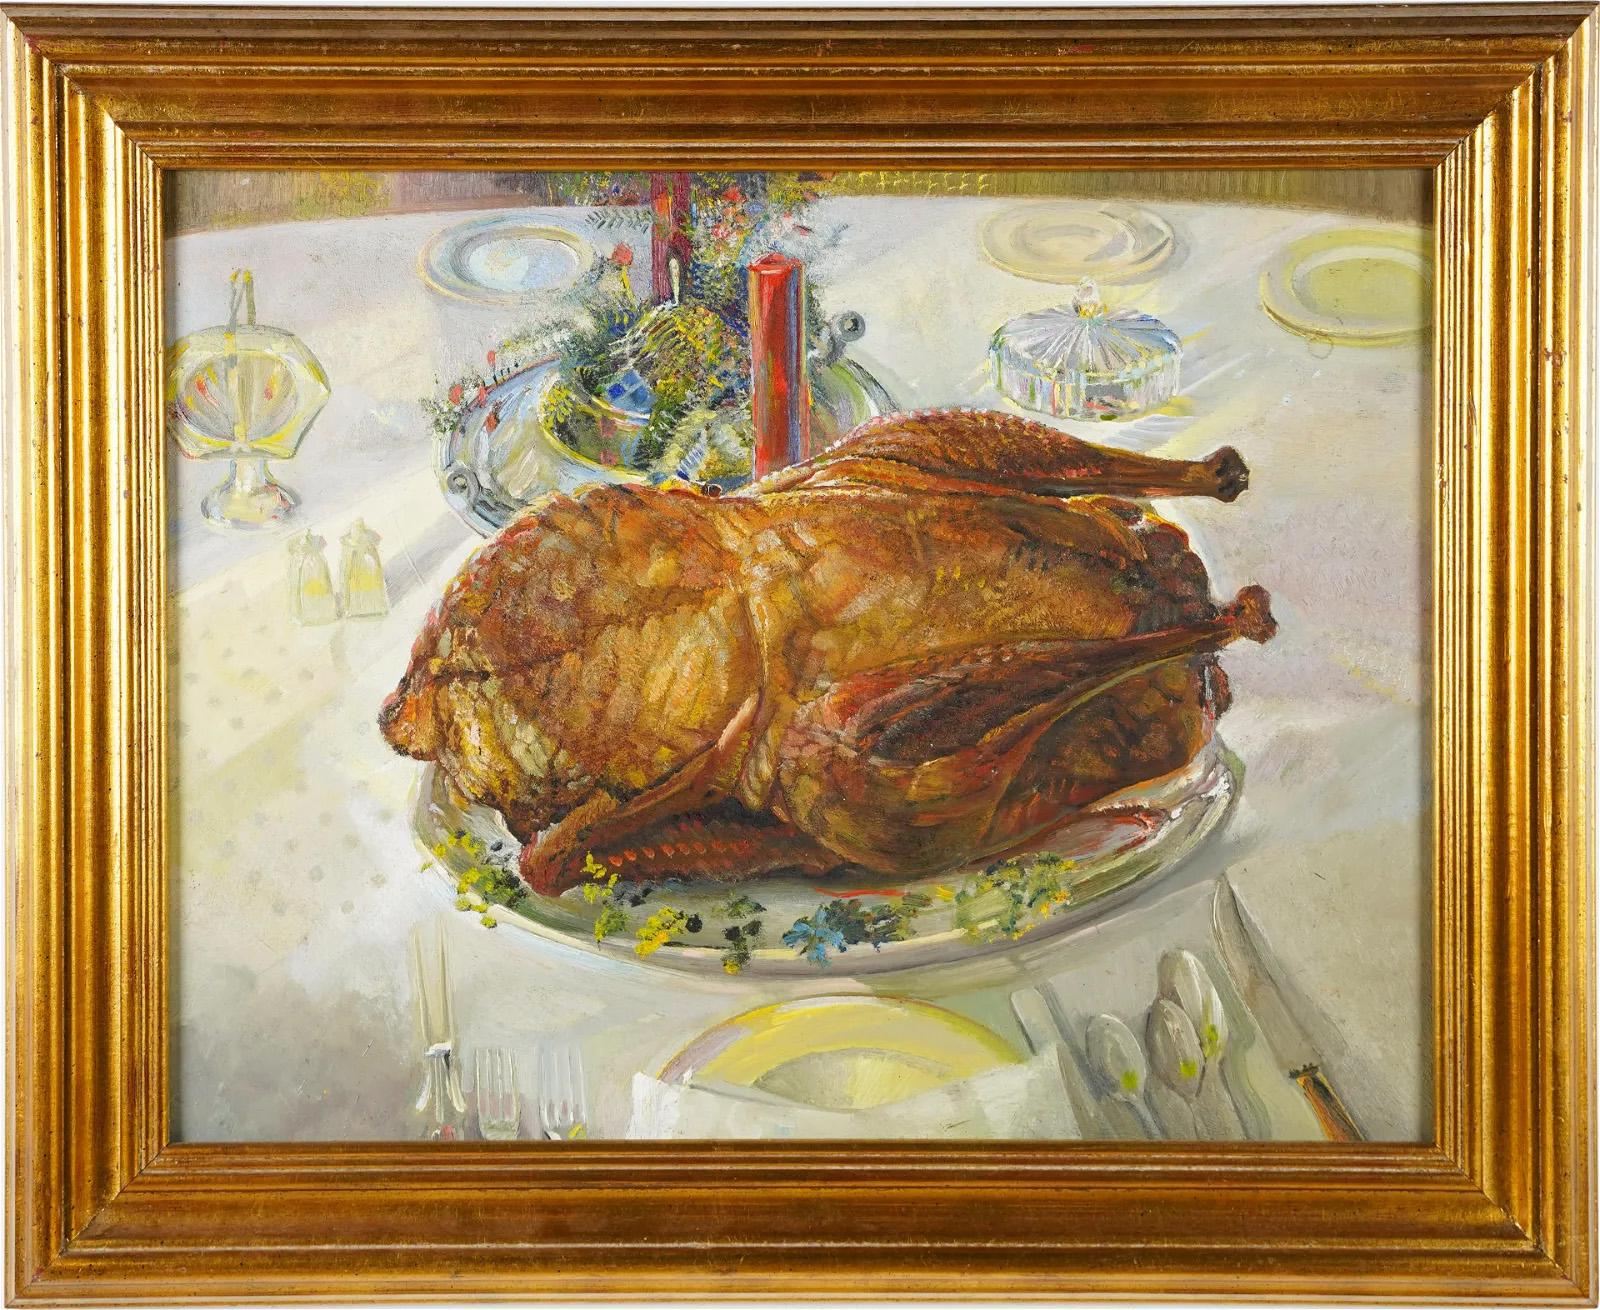 Unknown Landscape Painting - Antique American Impressionist Thanksgiving Turkey Dinner Still Life Painting